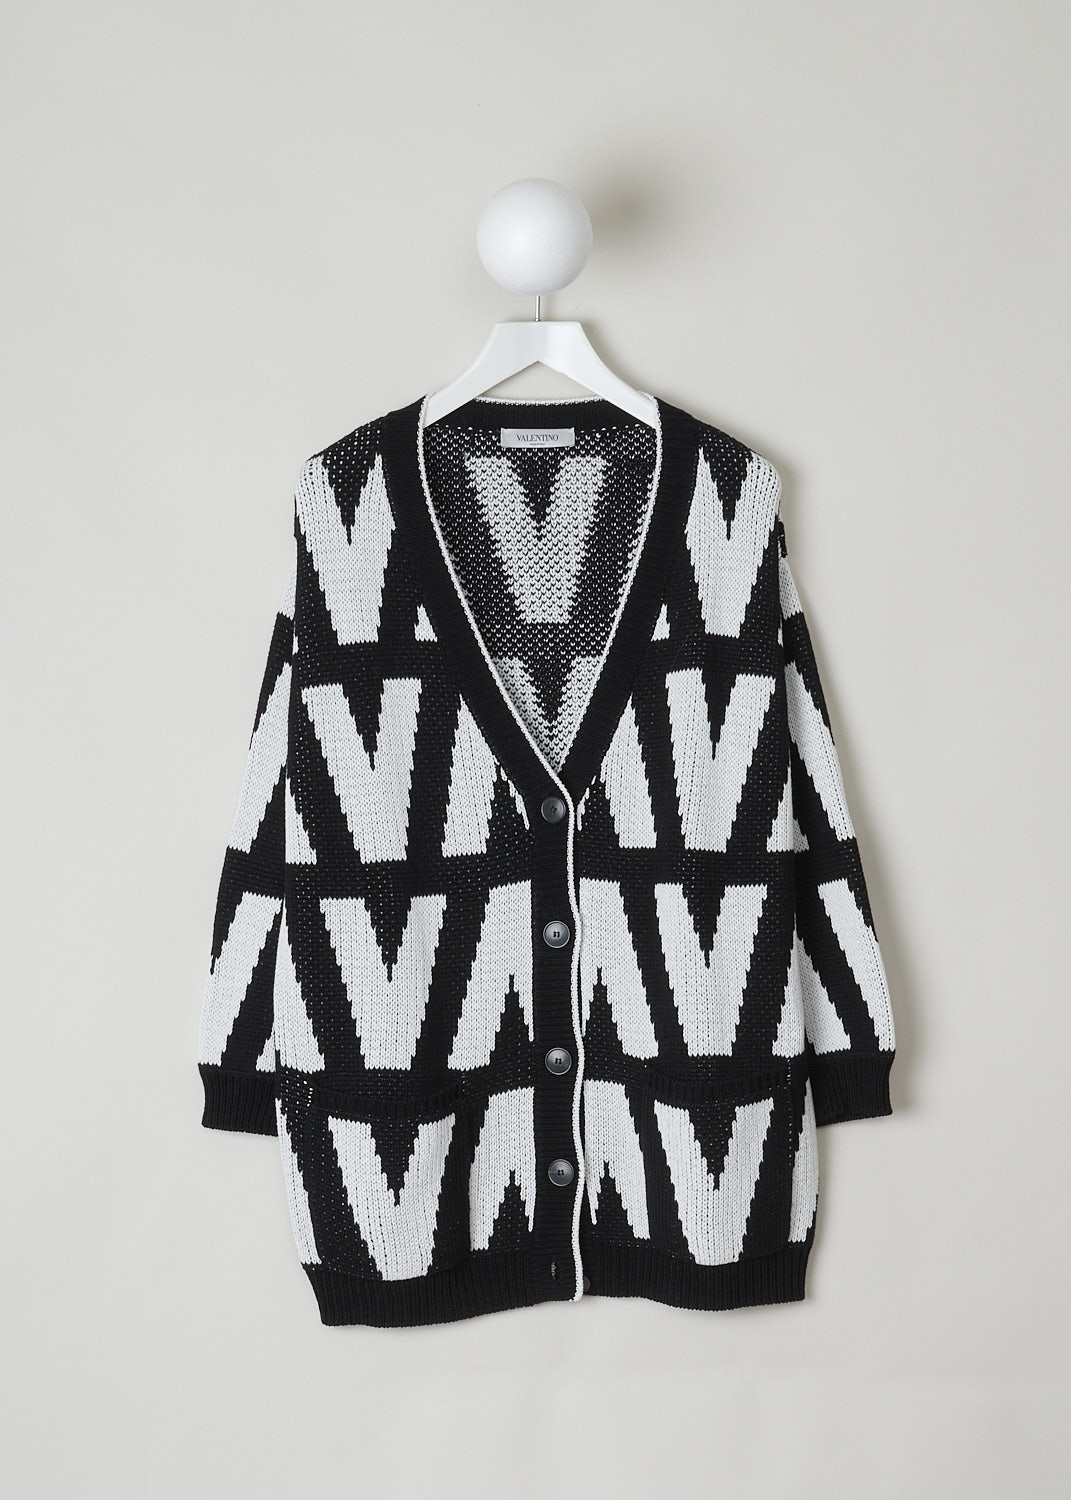 VALENTINO, BLACK AND WHITE CHUNKY KNIT CARDIGAN, WB3KA02I6G4_0NA, Black, White, Print, Front, This chunky knit cardigan has a black and white print with the brand's signature V incorporated in the motif. The cardigan has a ribbed V-neck. That same ribbed finish can be found along the front button closure, on the cuffs and on the hemline. Two patch pockets can be found on the front. The cardigan has an oversized silhouette. 
